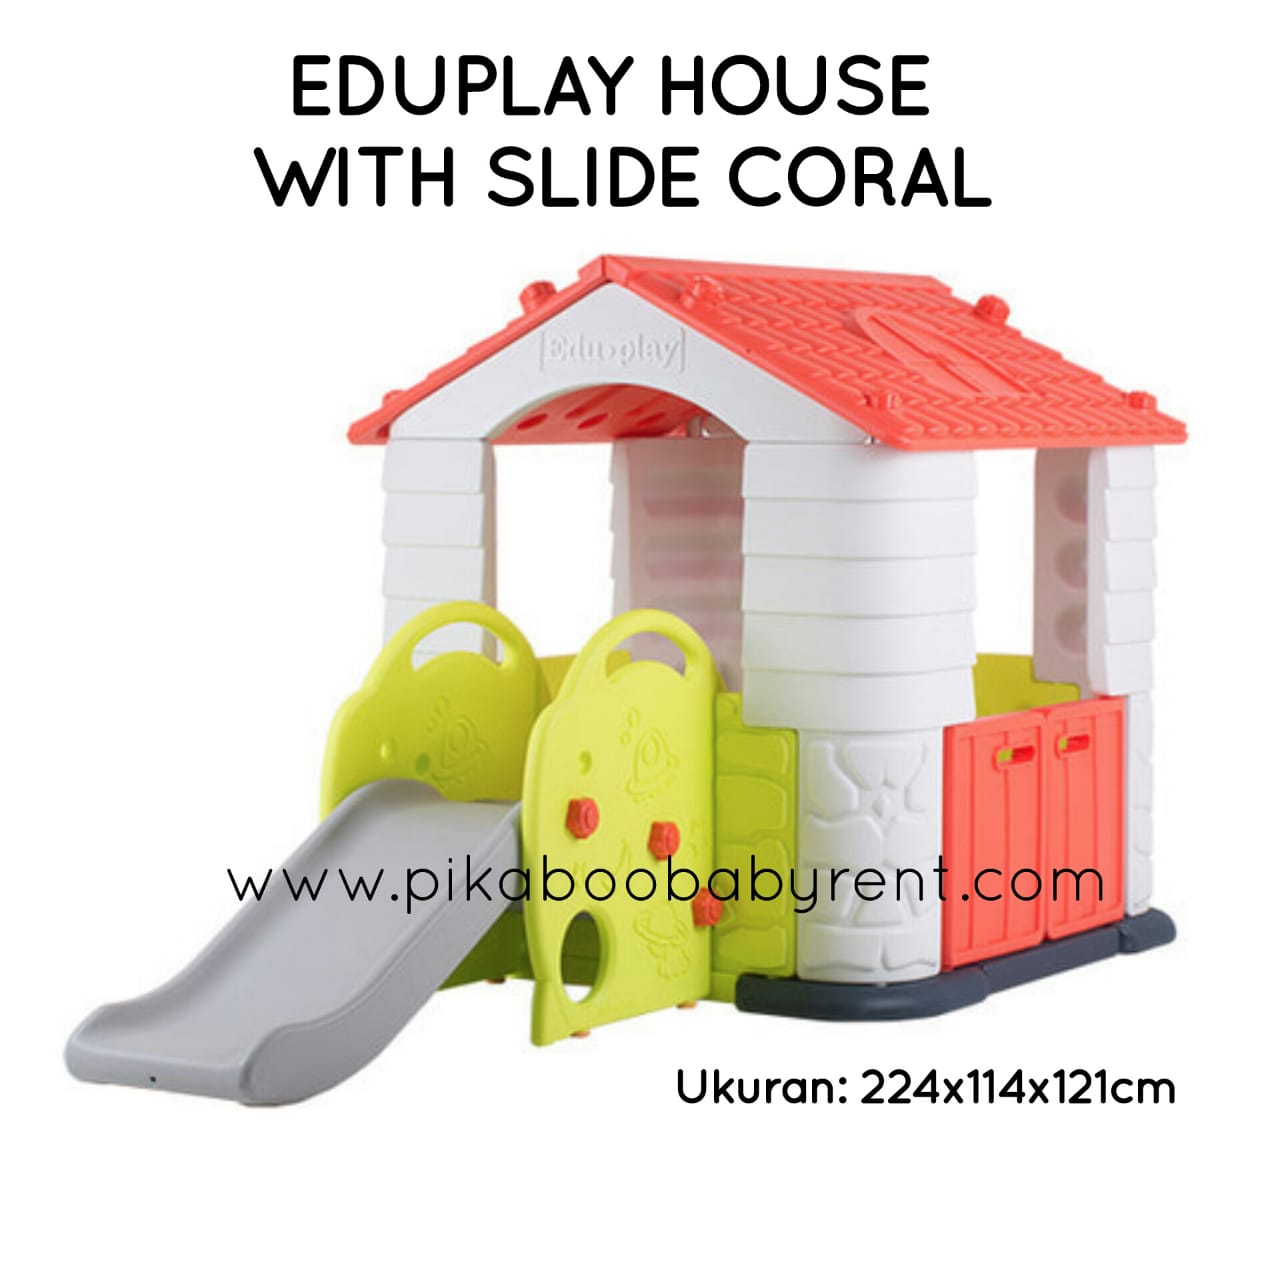 EDUPLAY HOUSE WITH SLIDE CORAL